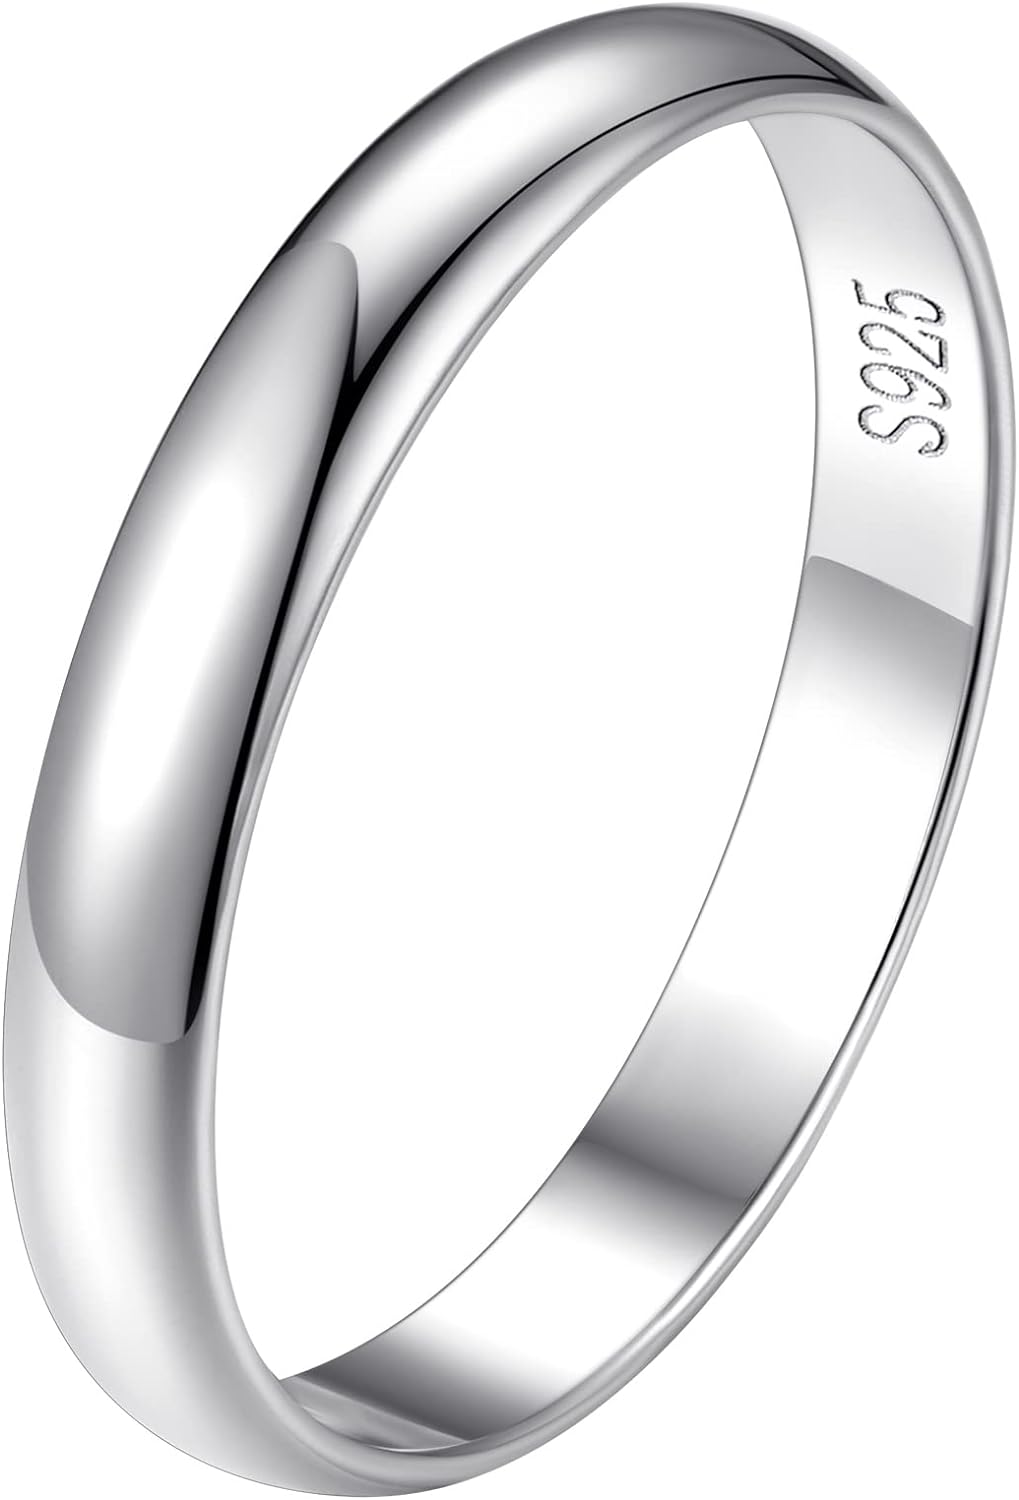 FindChic 925 Sterling Silver Band Rings for Women Girls Simple Engagement Wedding Band